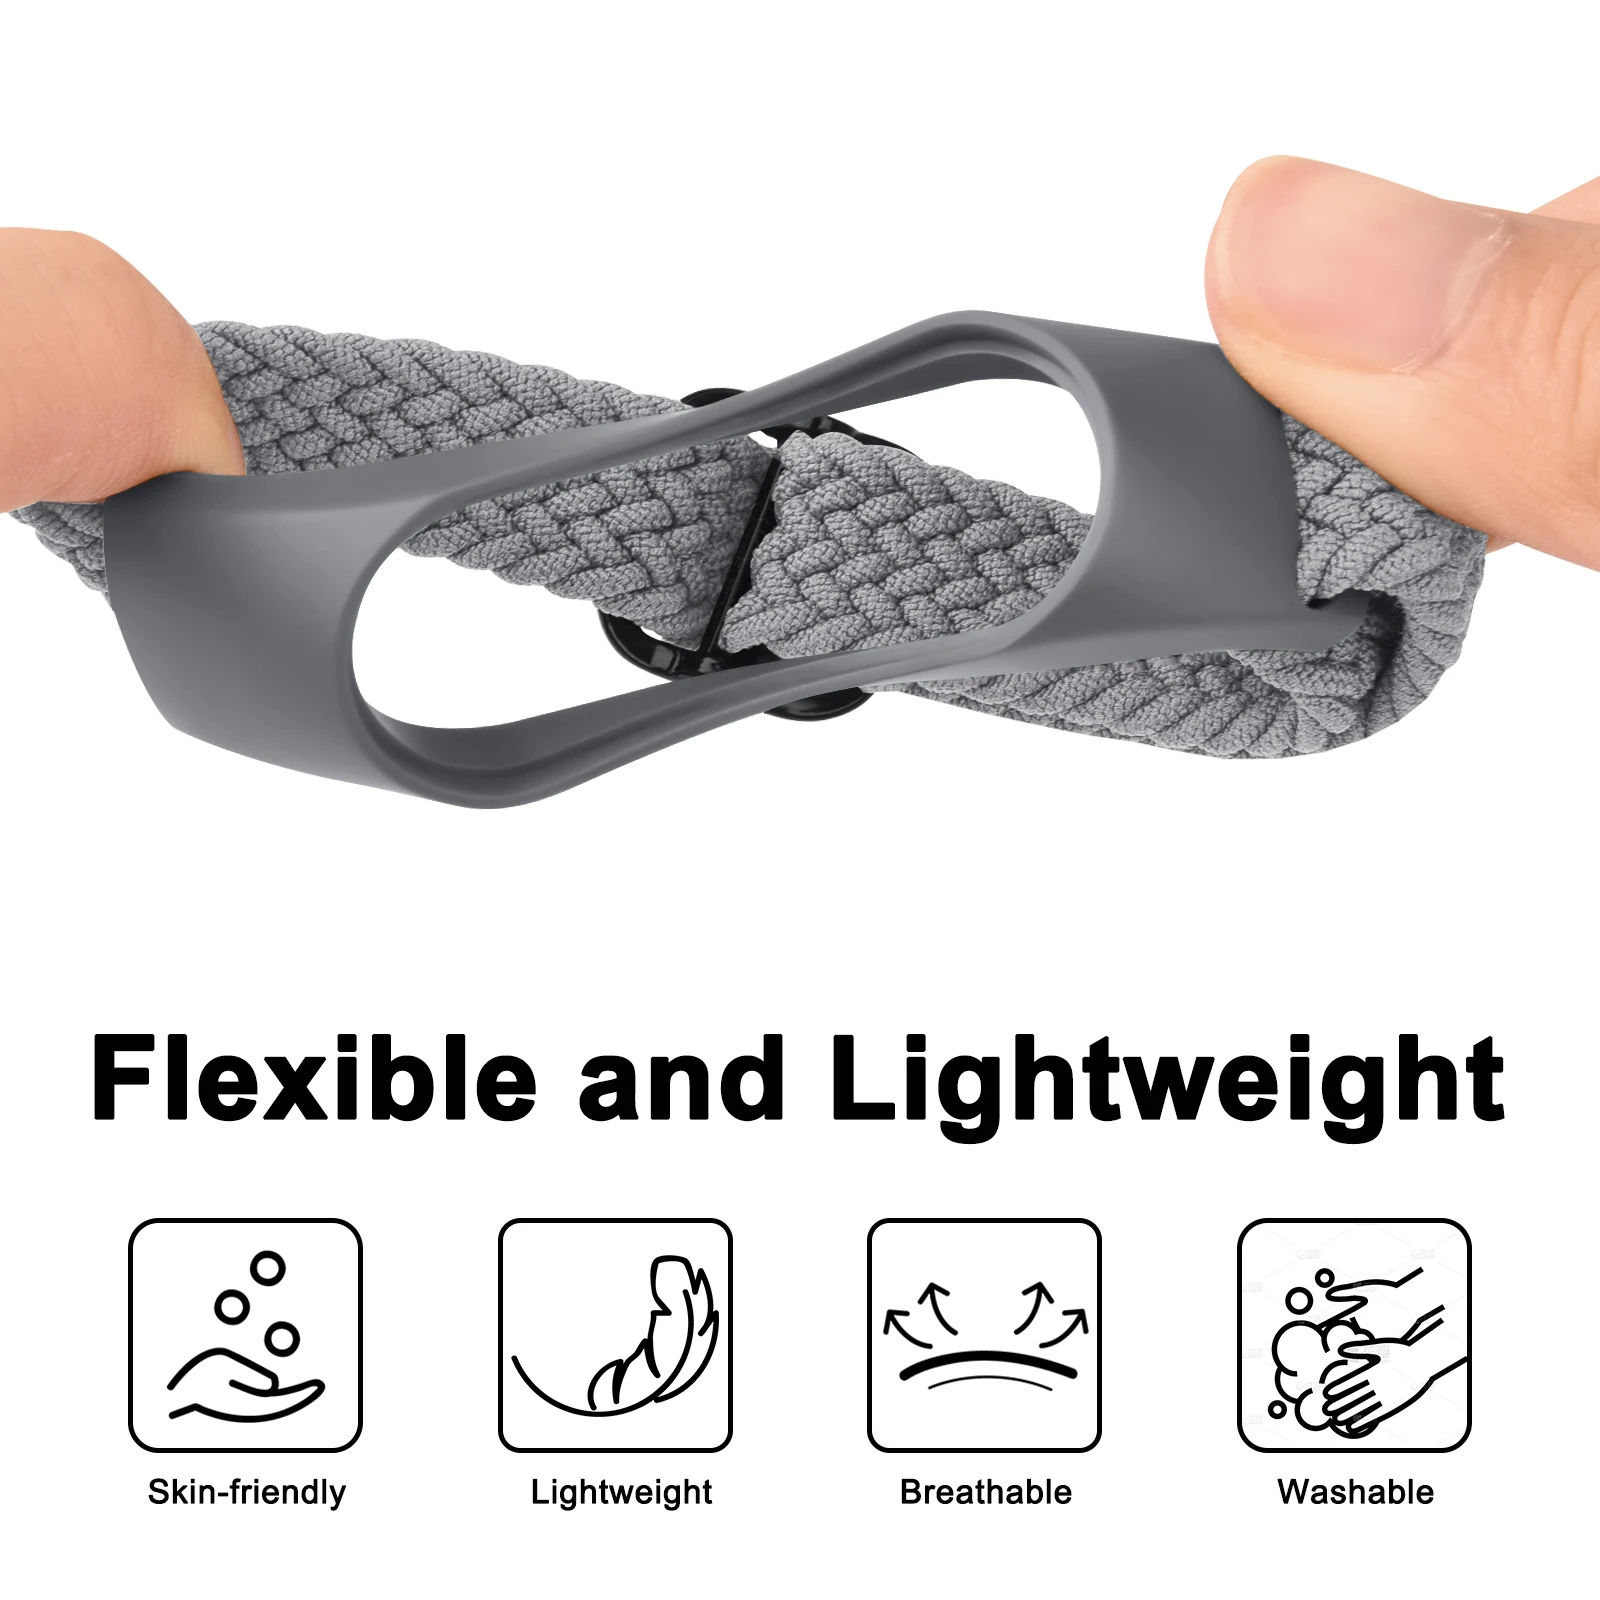 Braided Watchband For Xiaomi Mi Band 7 6 5 4 3 Strap Elastic Adjustable Wristband For Amazfit Band 5 Band Replacement Bracelet